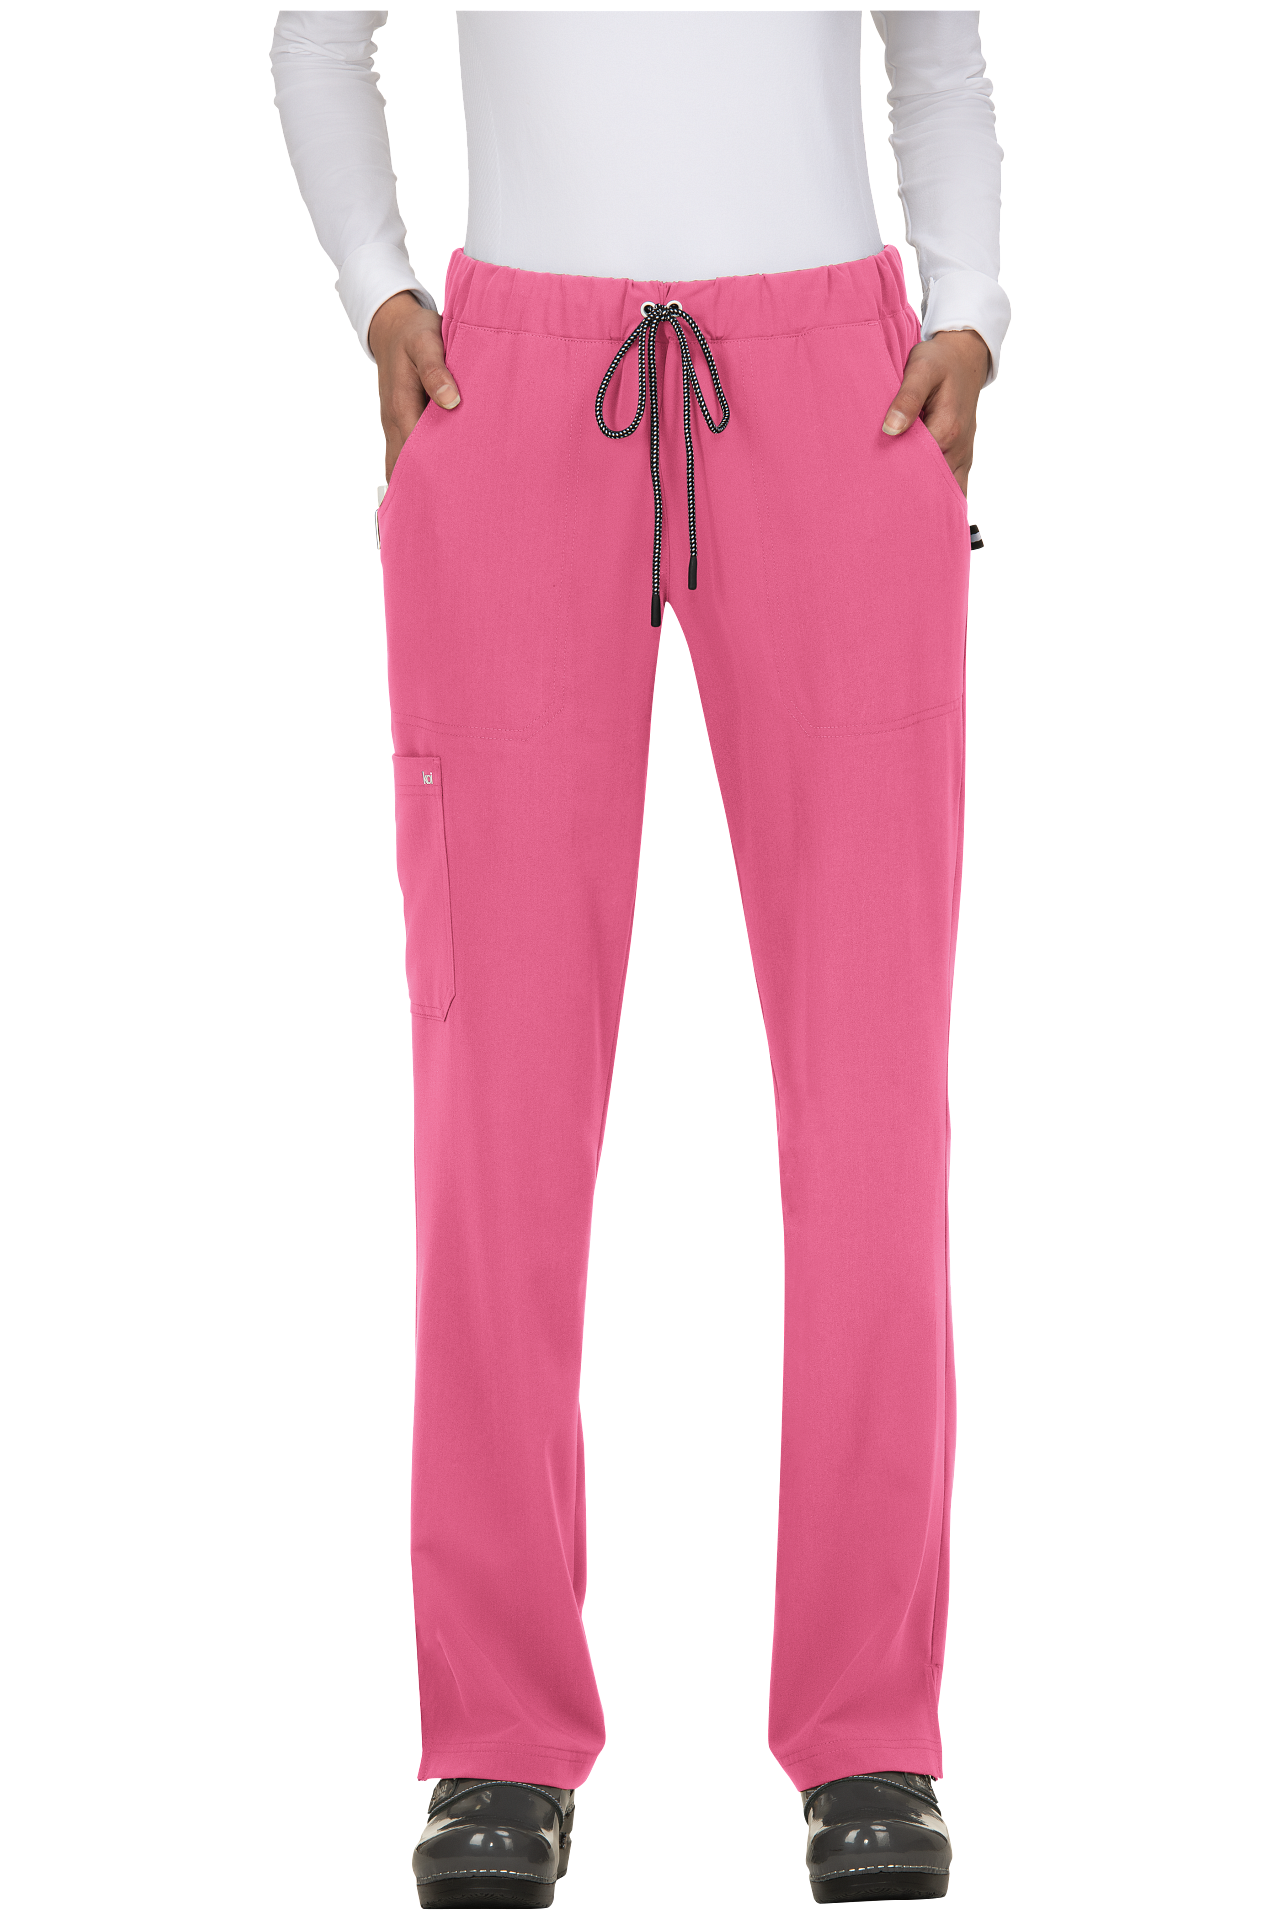 Koi Scrub Pants Next Gen Everyday Hero in Rose at Parker's Clothing and Shoes.